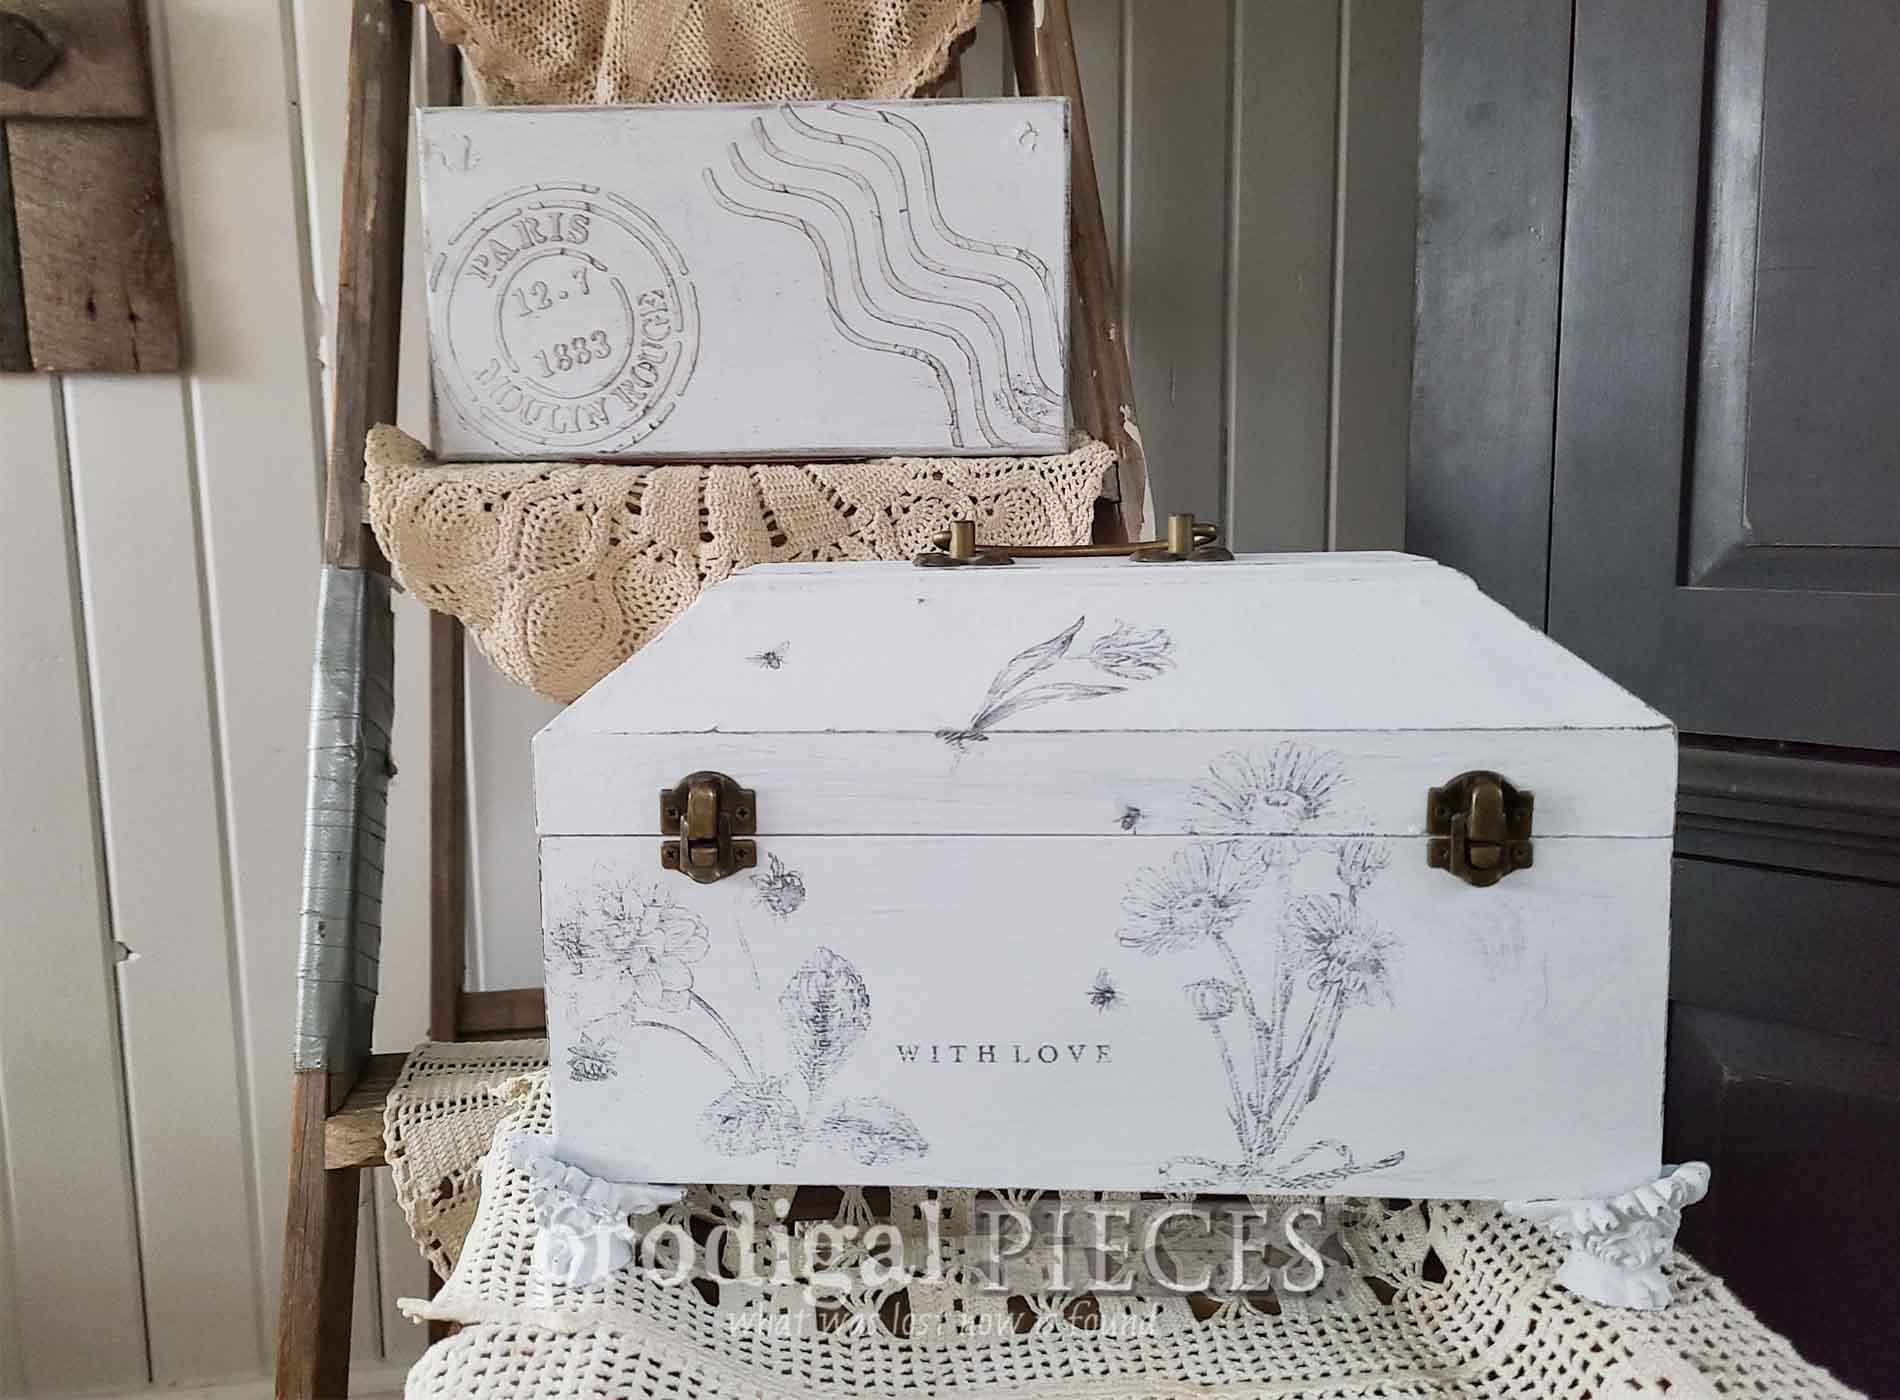 Featured Thrifted Box Makeover from Gawdy to Chic by Larissa of Prodigal Pieces | prodigalpieces.com #prodigalpieces